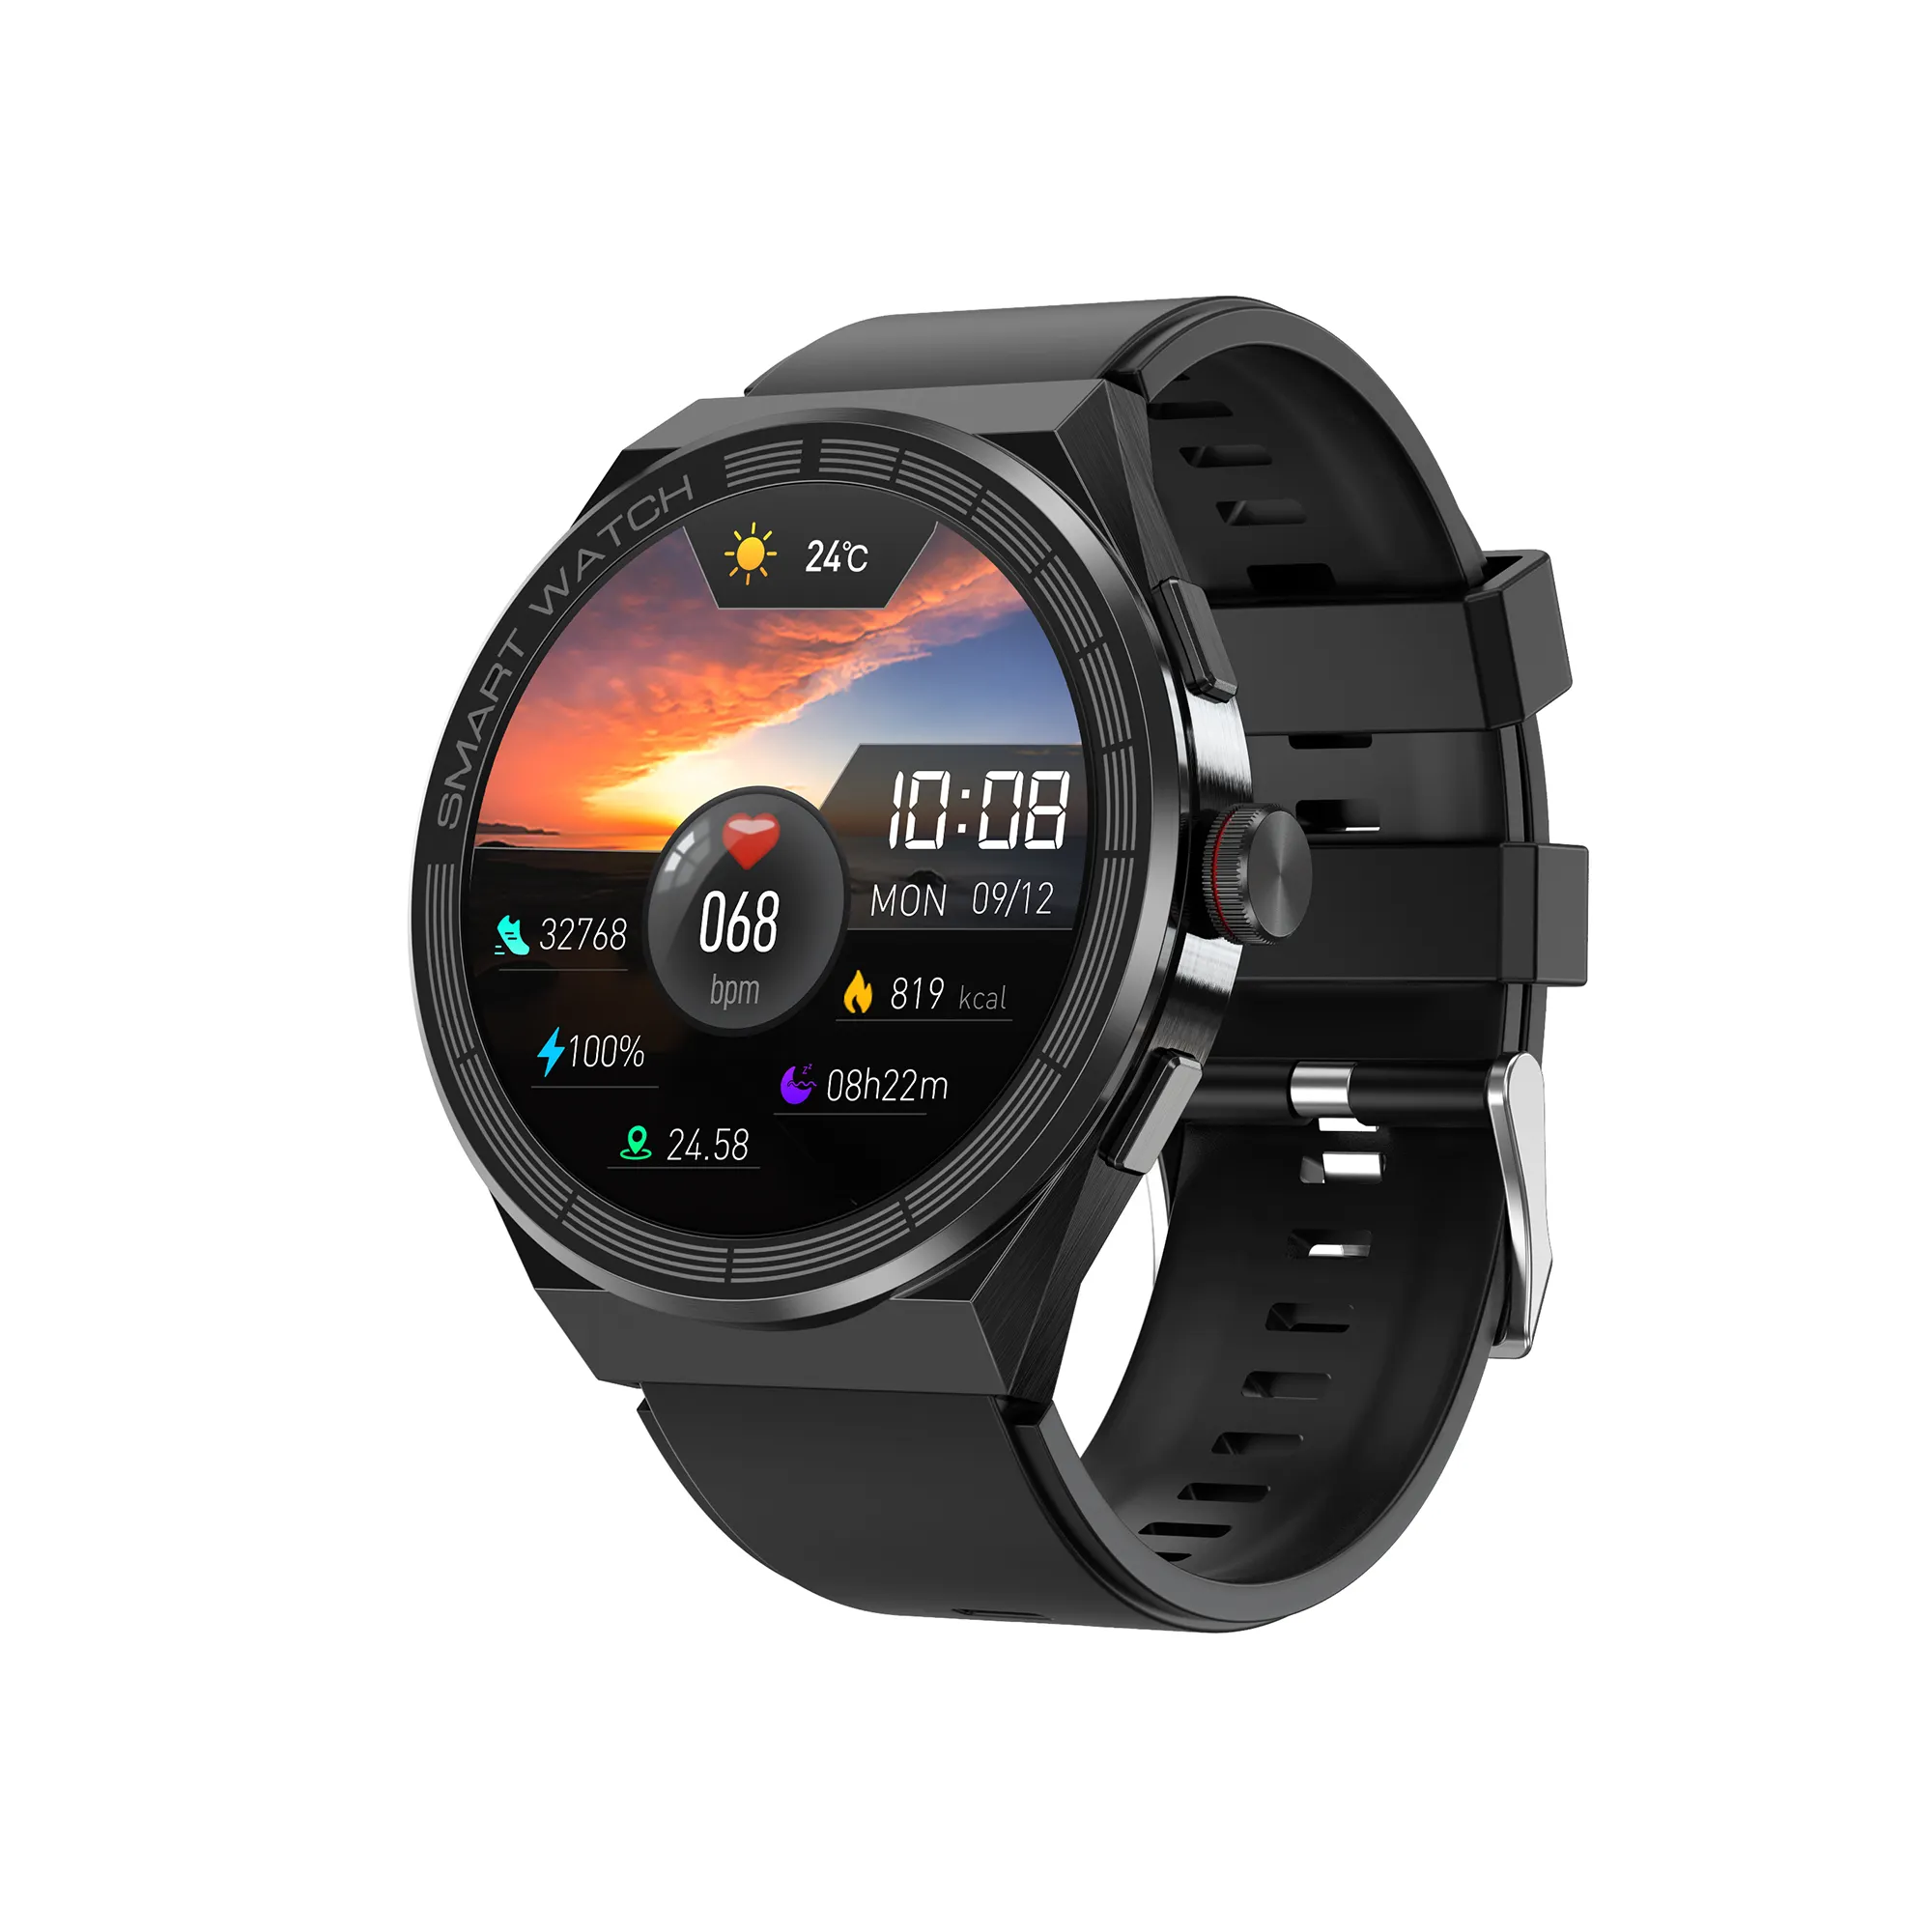 SKMEI 231s round dial display stylish BT answer make Call fitness smartwatch heart rate outdoor sport wrist Men smart watches